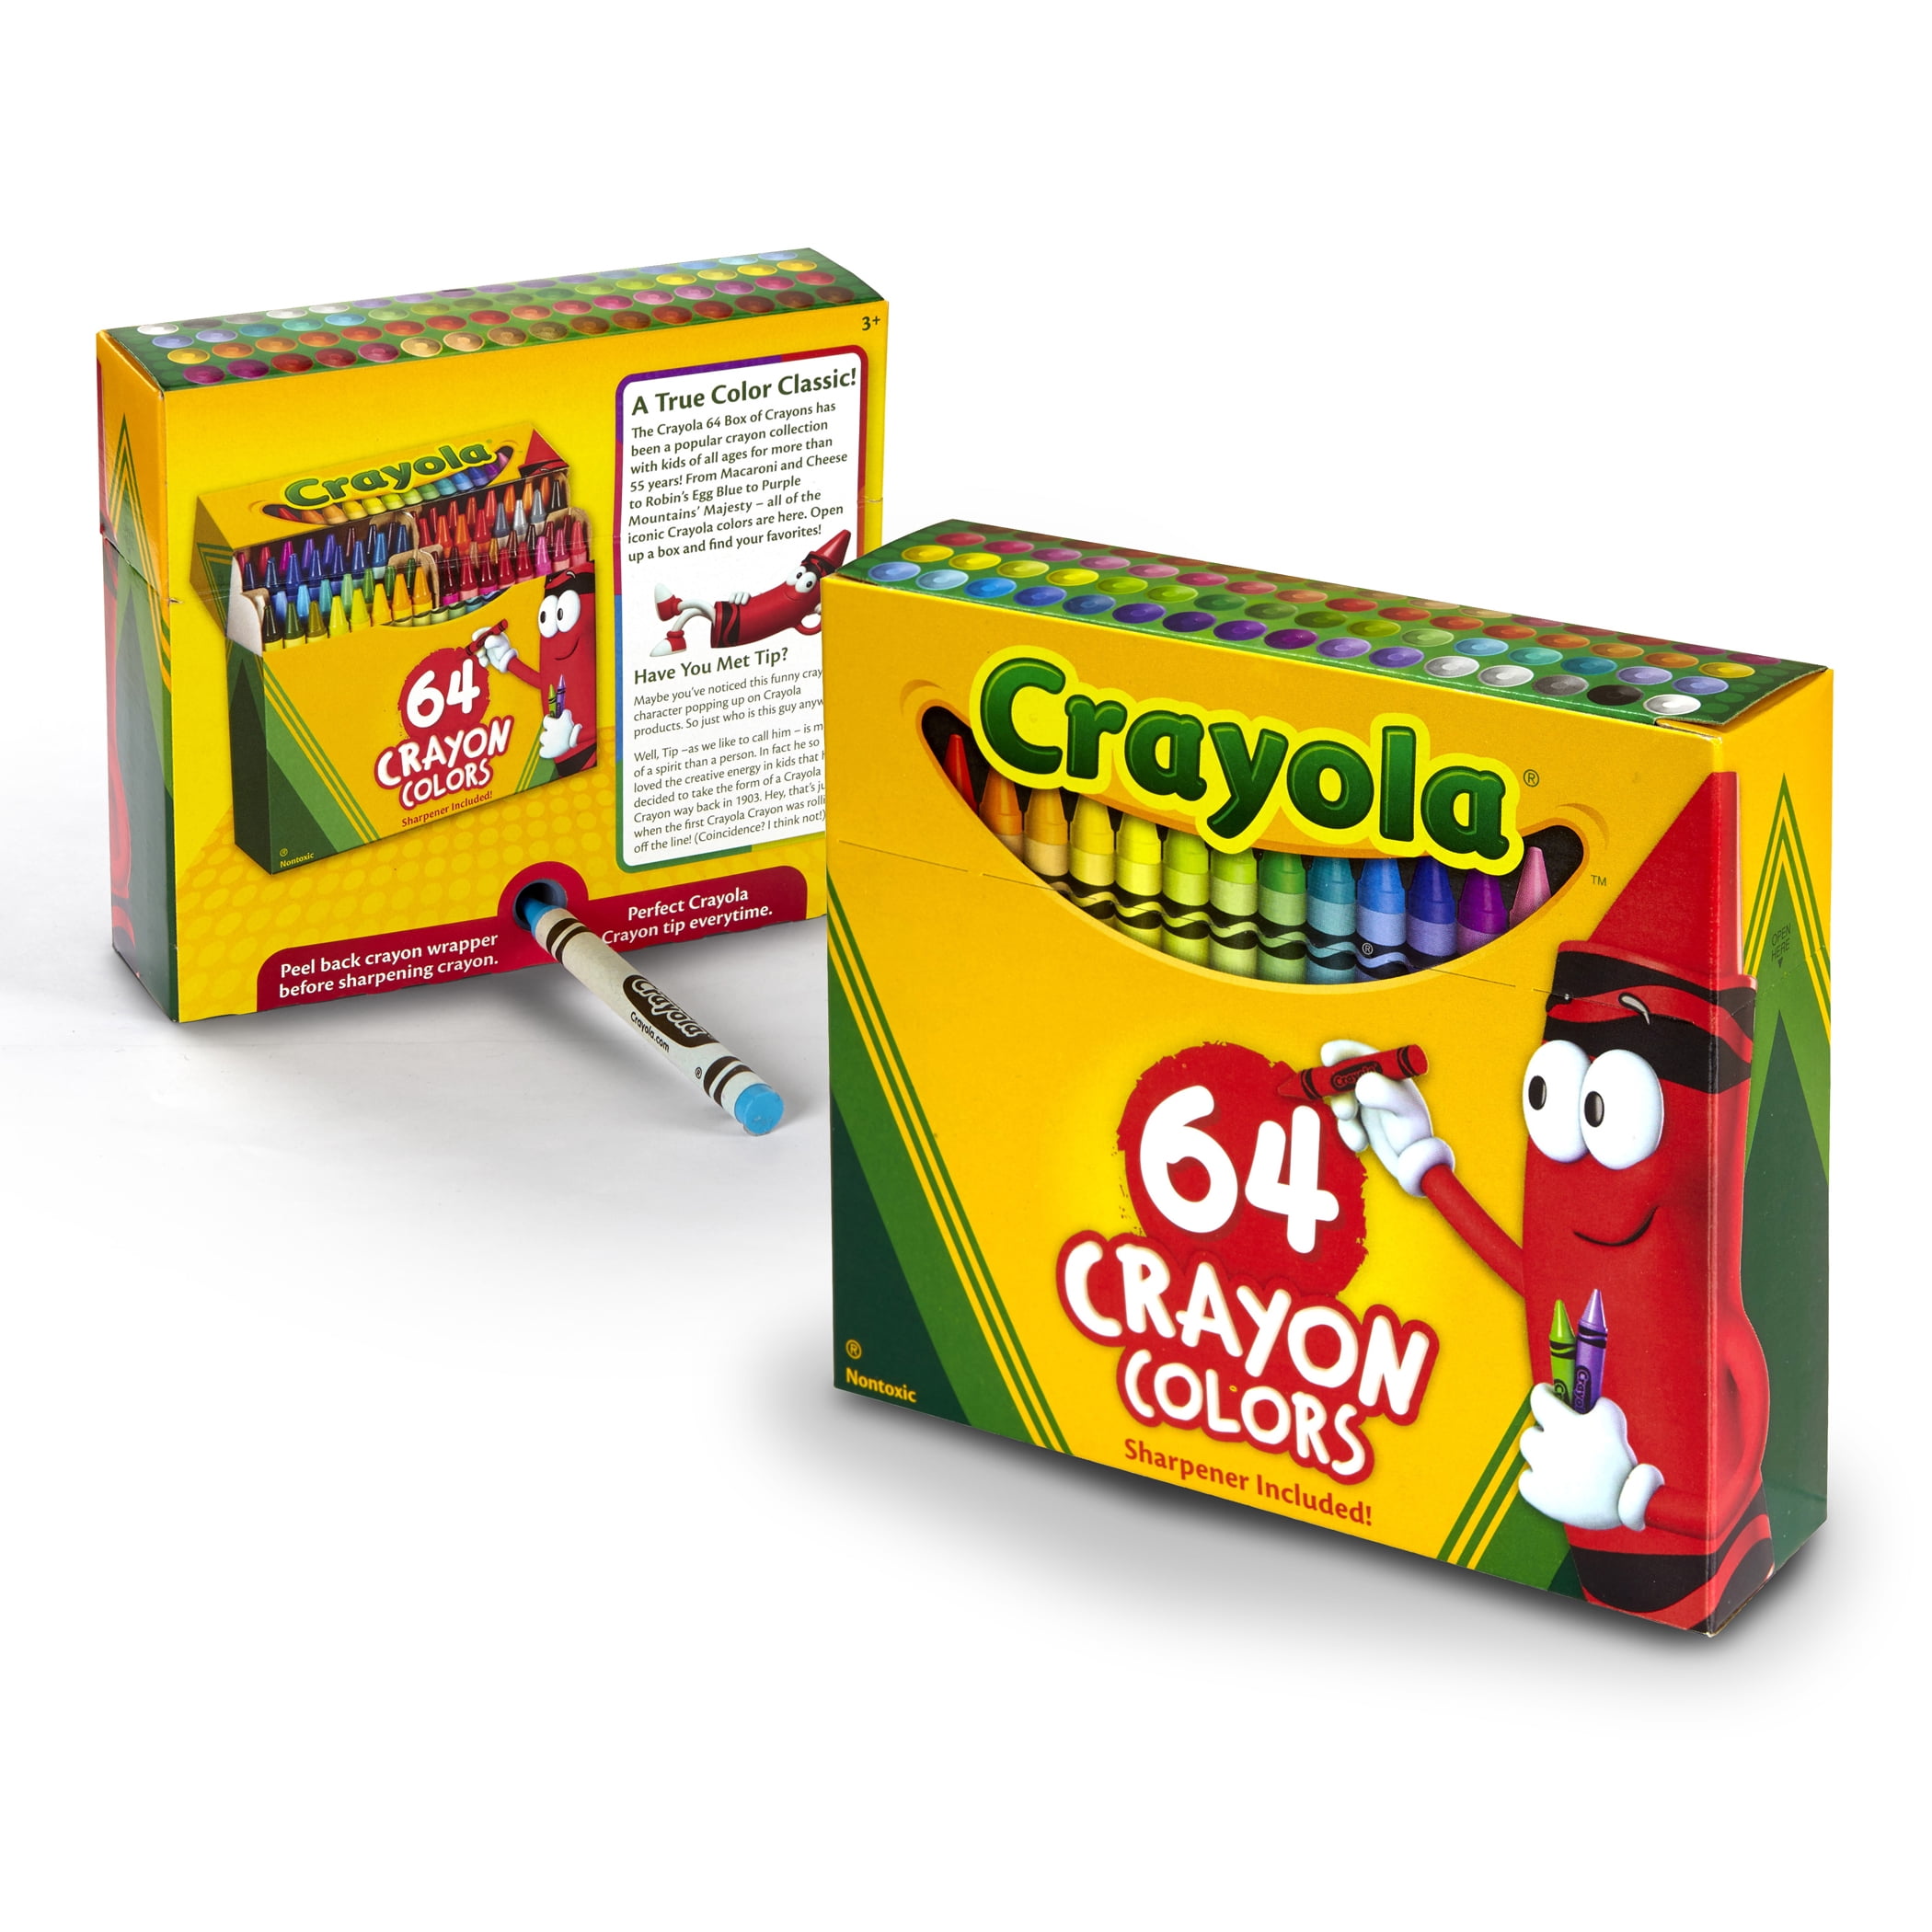 Crayon boxes with a built-in sharpener : r/nostalgia